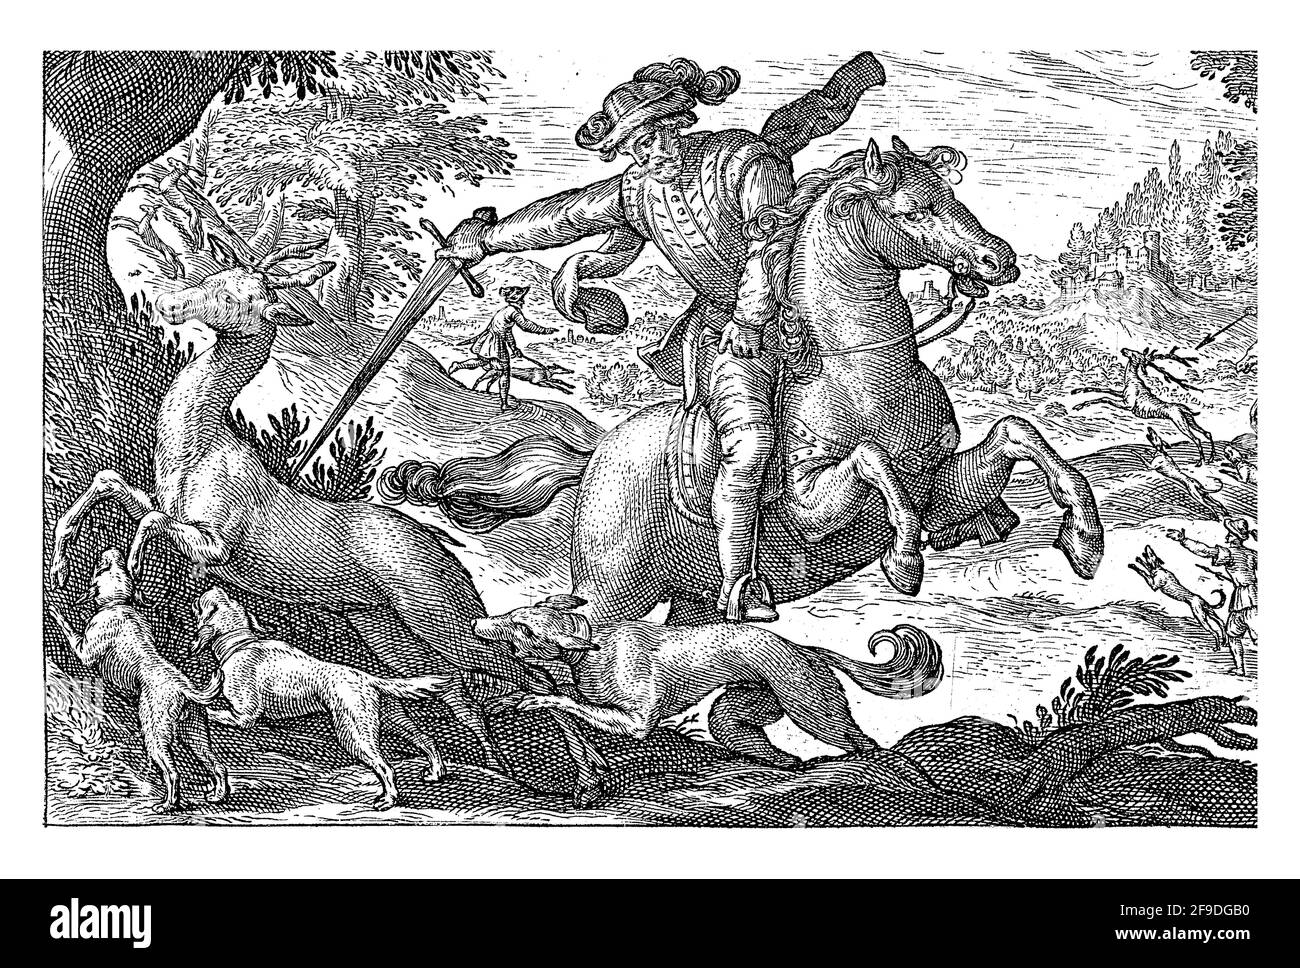 Hilly landscape with in the foreground a horseman with drawn sword and three dogs chasing a deer. In the background various hunters and riders on deer Stock Photo